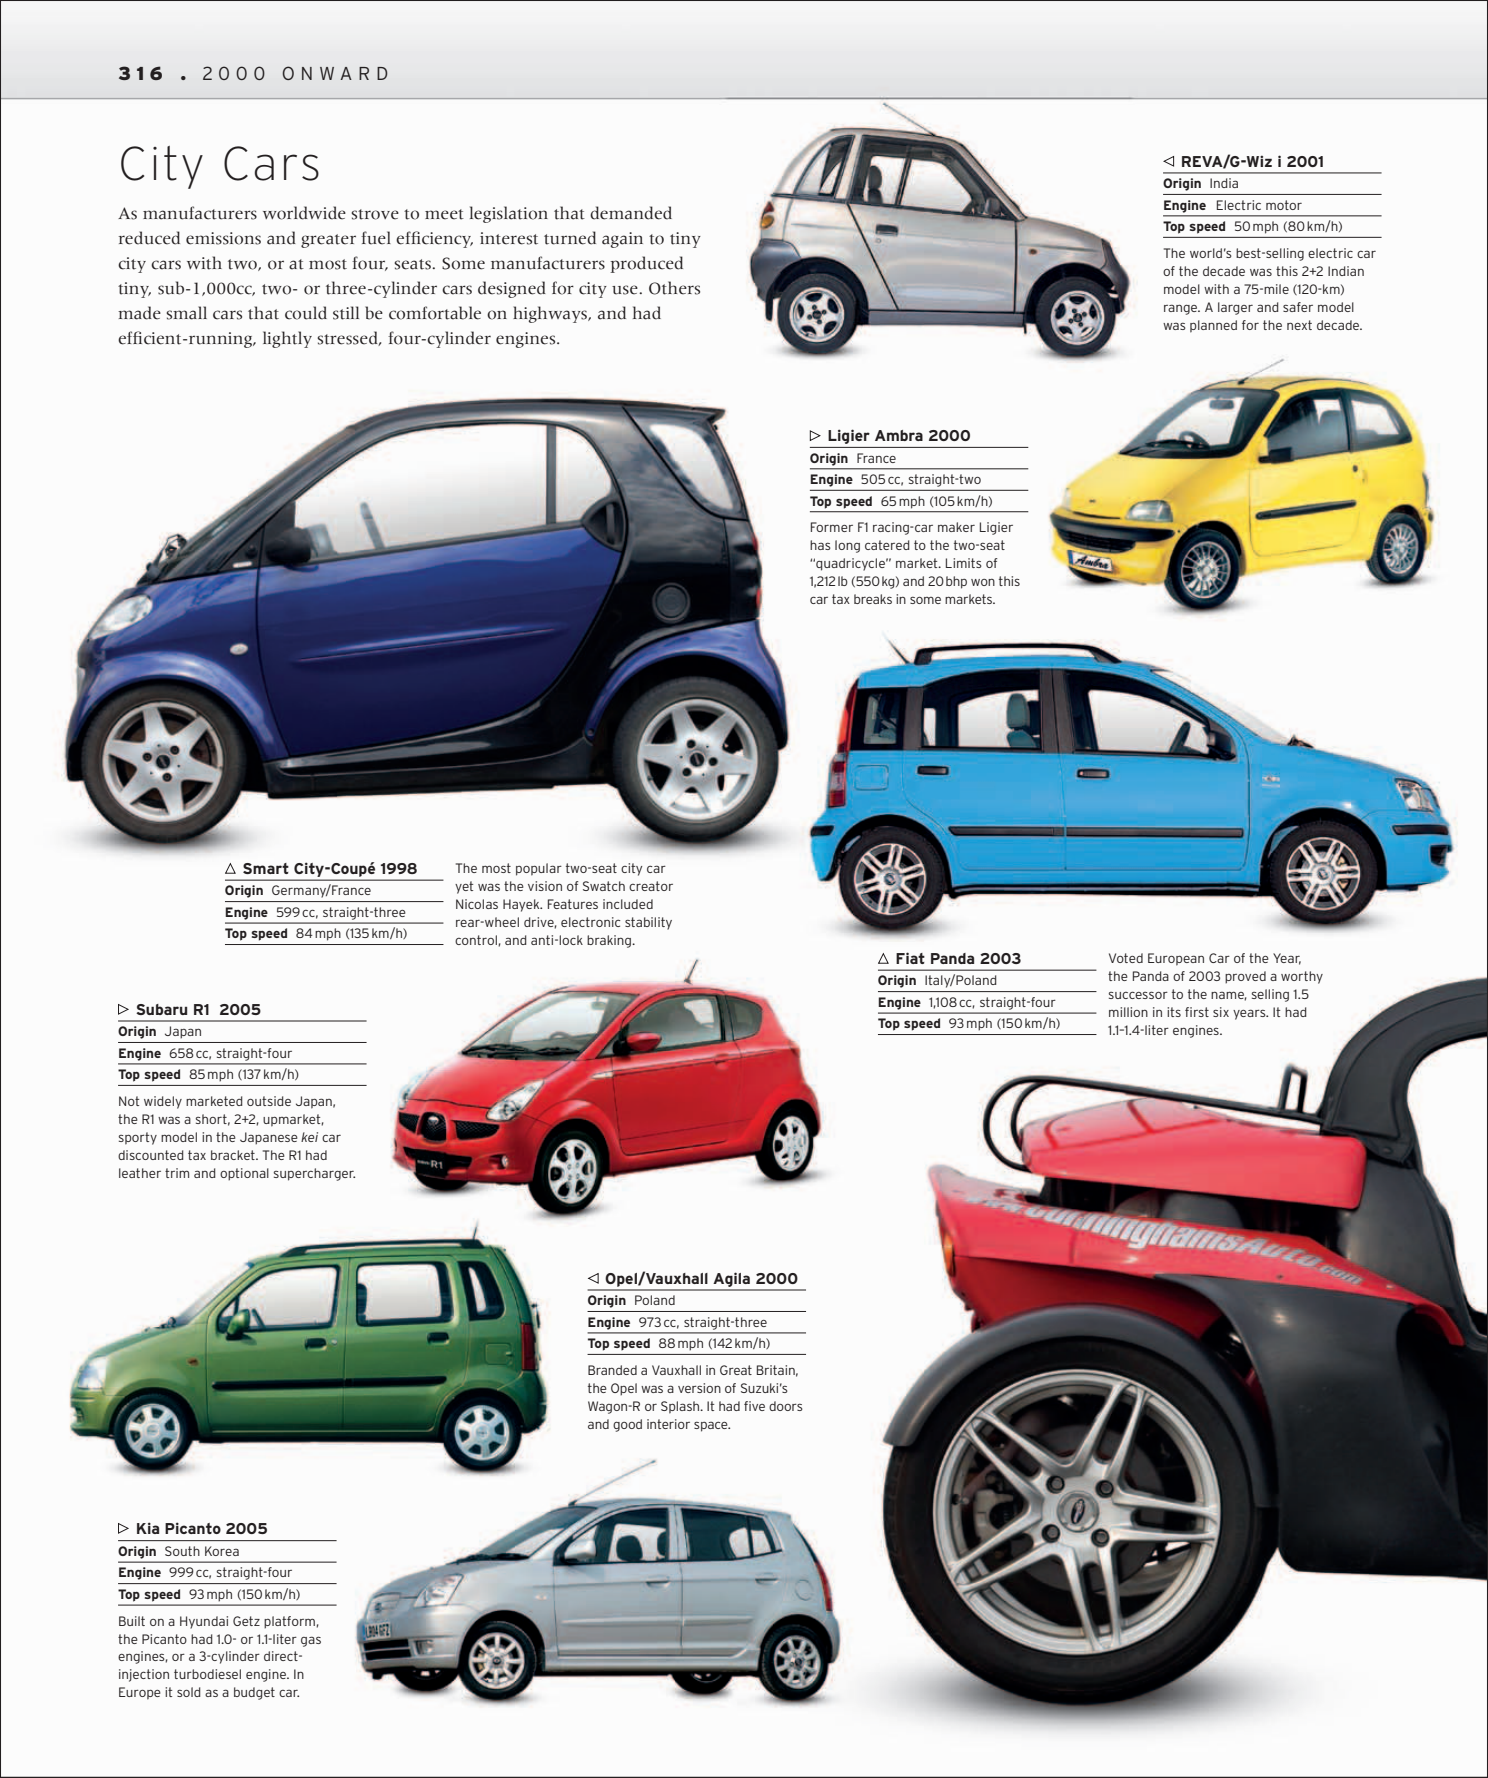 Car%20-%20The%20Definitive%20Visual%20History%20of%20the%20Automobile_318.png